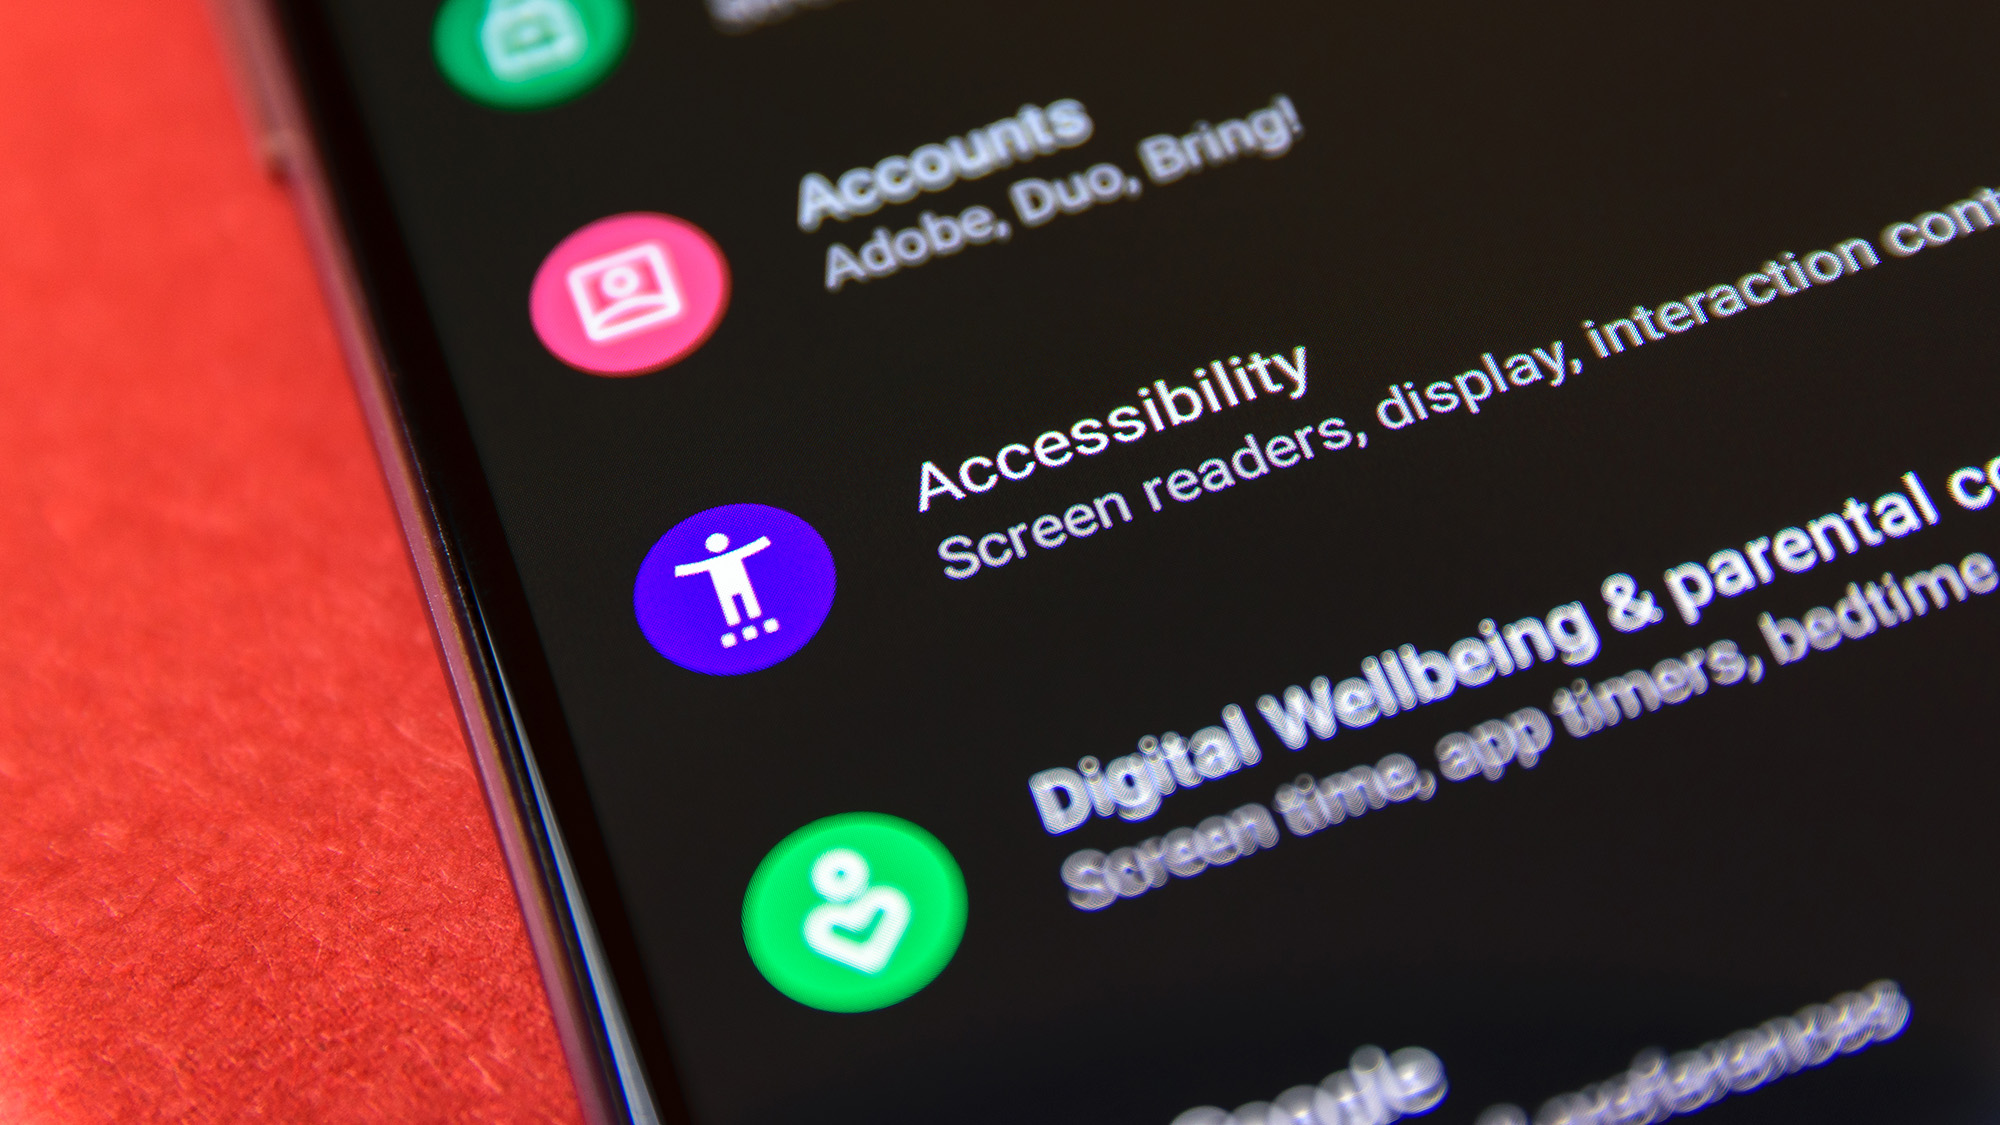 Accessibility settings on the Samsung Galaxy S7 Edge can be easily adjusted to meet the needs of users who require a more magazine design-friendly or accessible design interface.